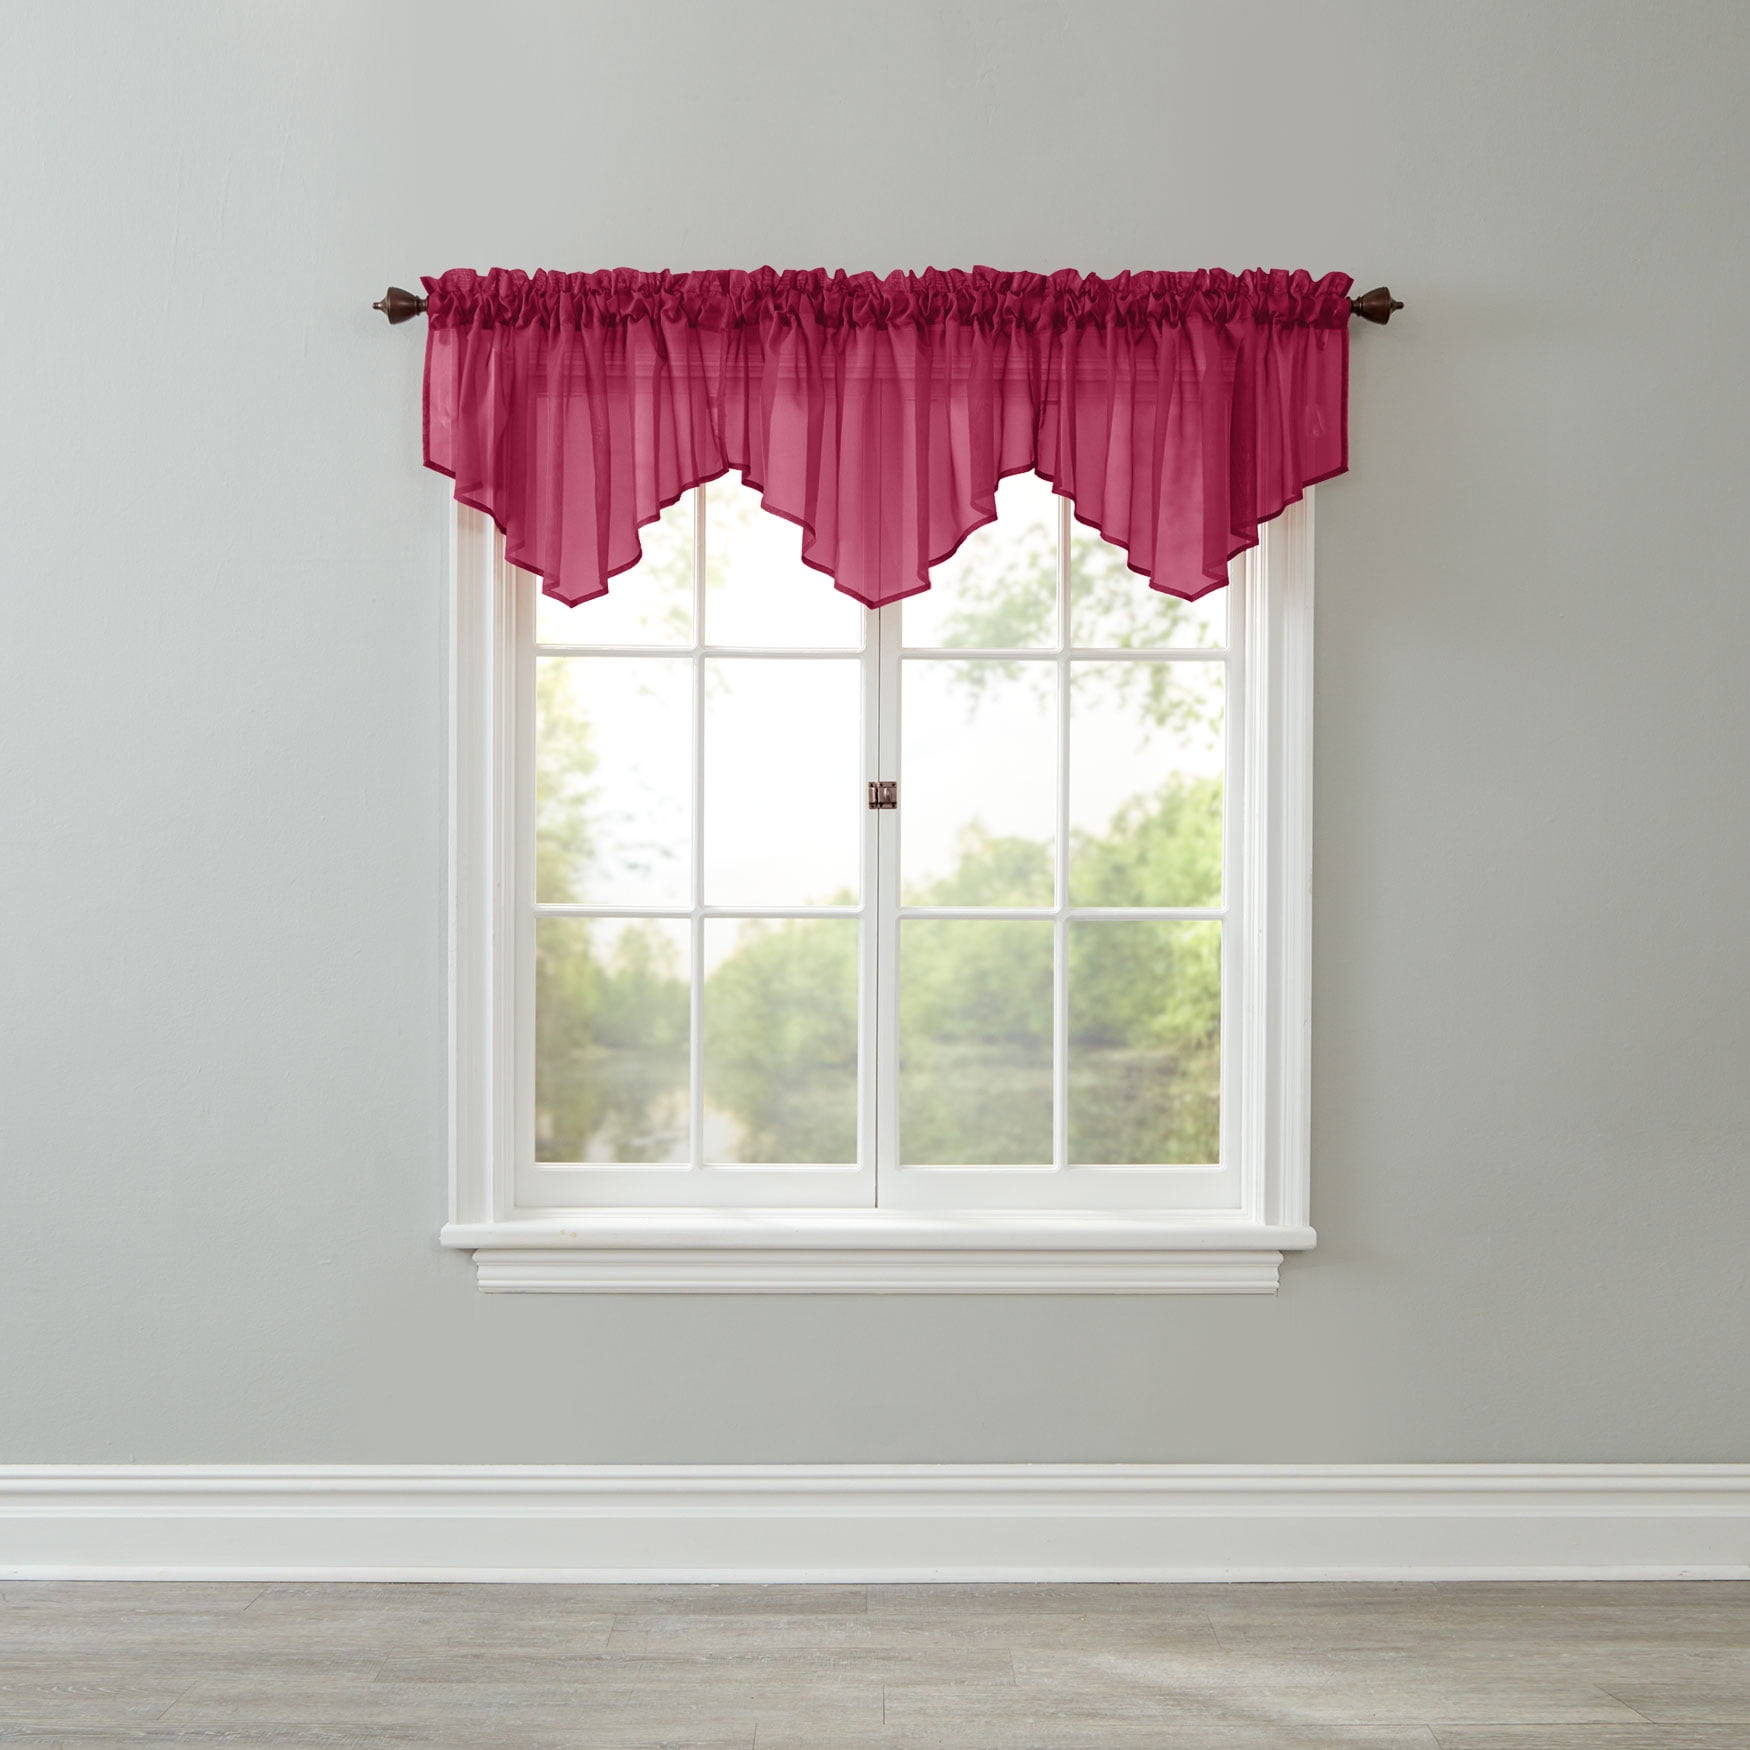 Easy Care Fabrics 2 Piece Burgundy Sheer Voile Beaded Valance 51-Inch X 24-Inch